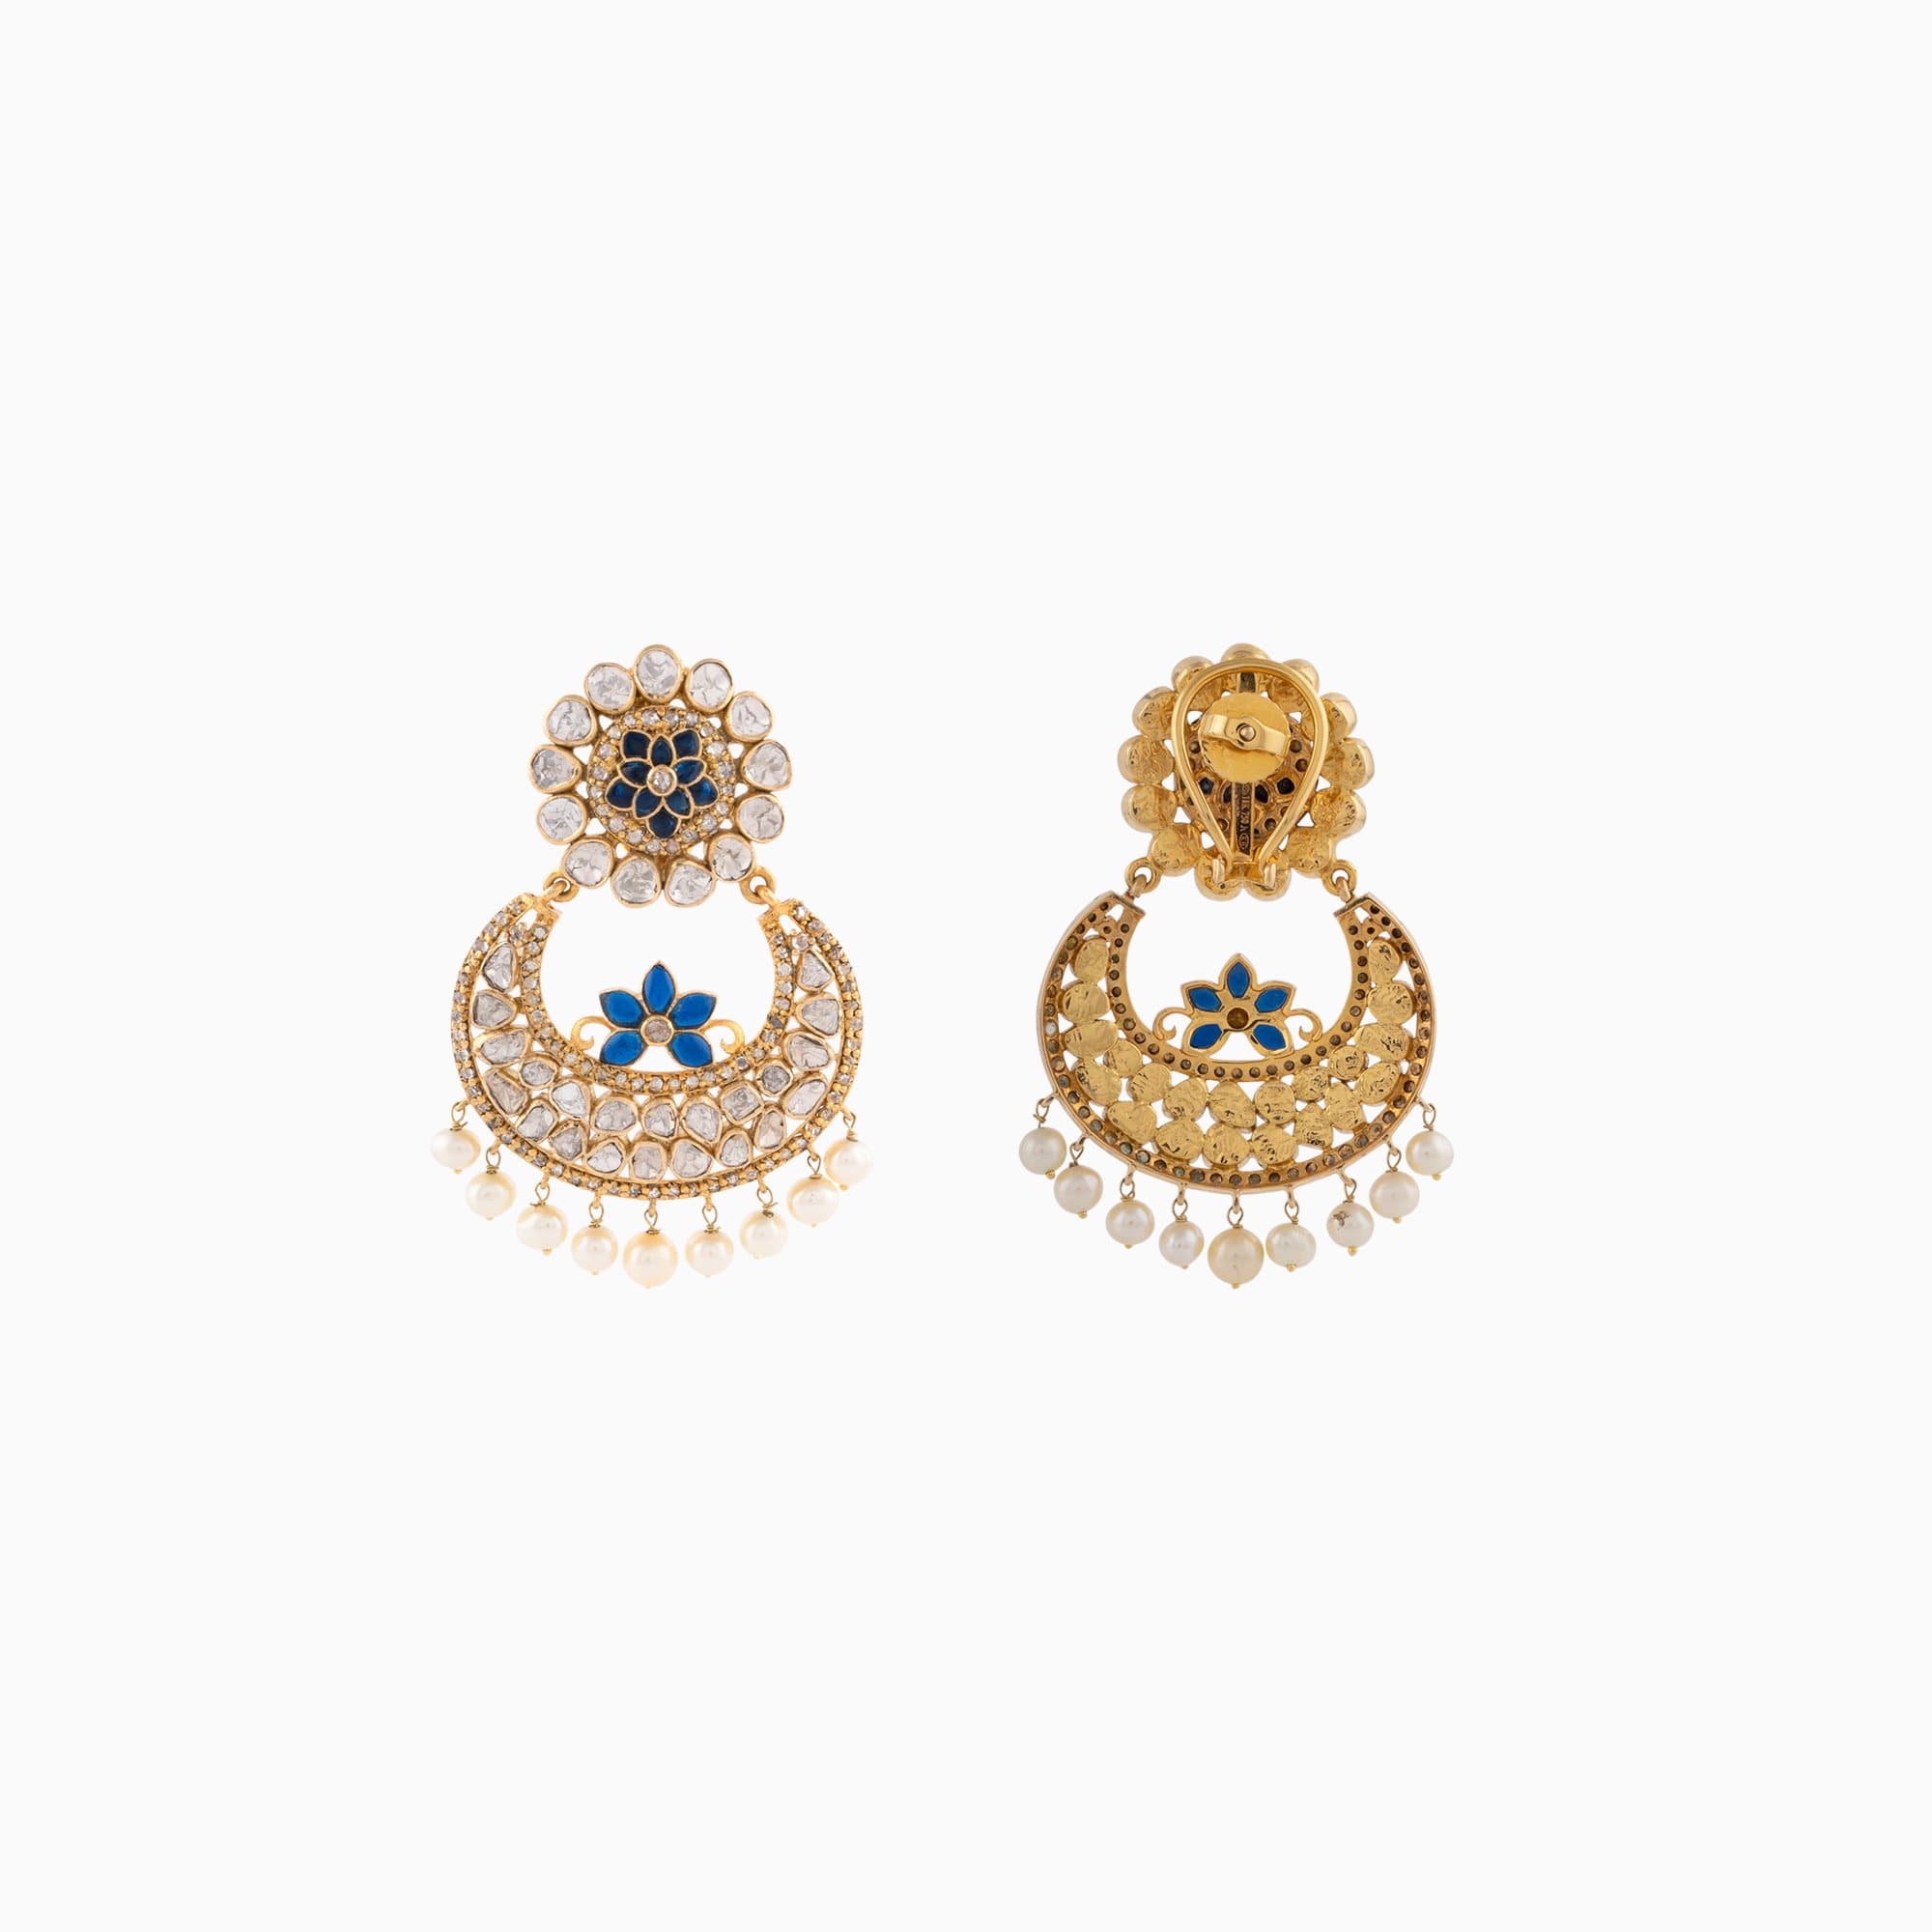 Earring Pair with Polki Diamond, Rose Cut, Blue Stone and Pearls-KME1858